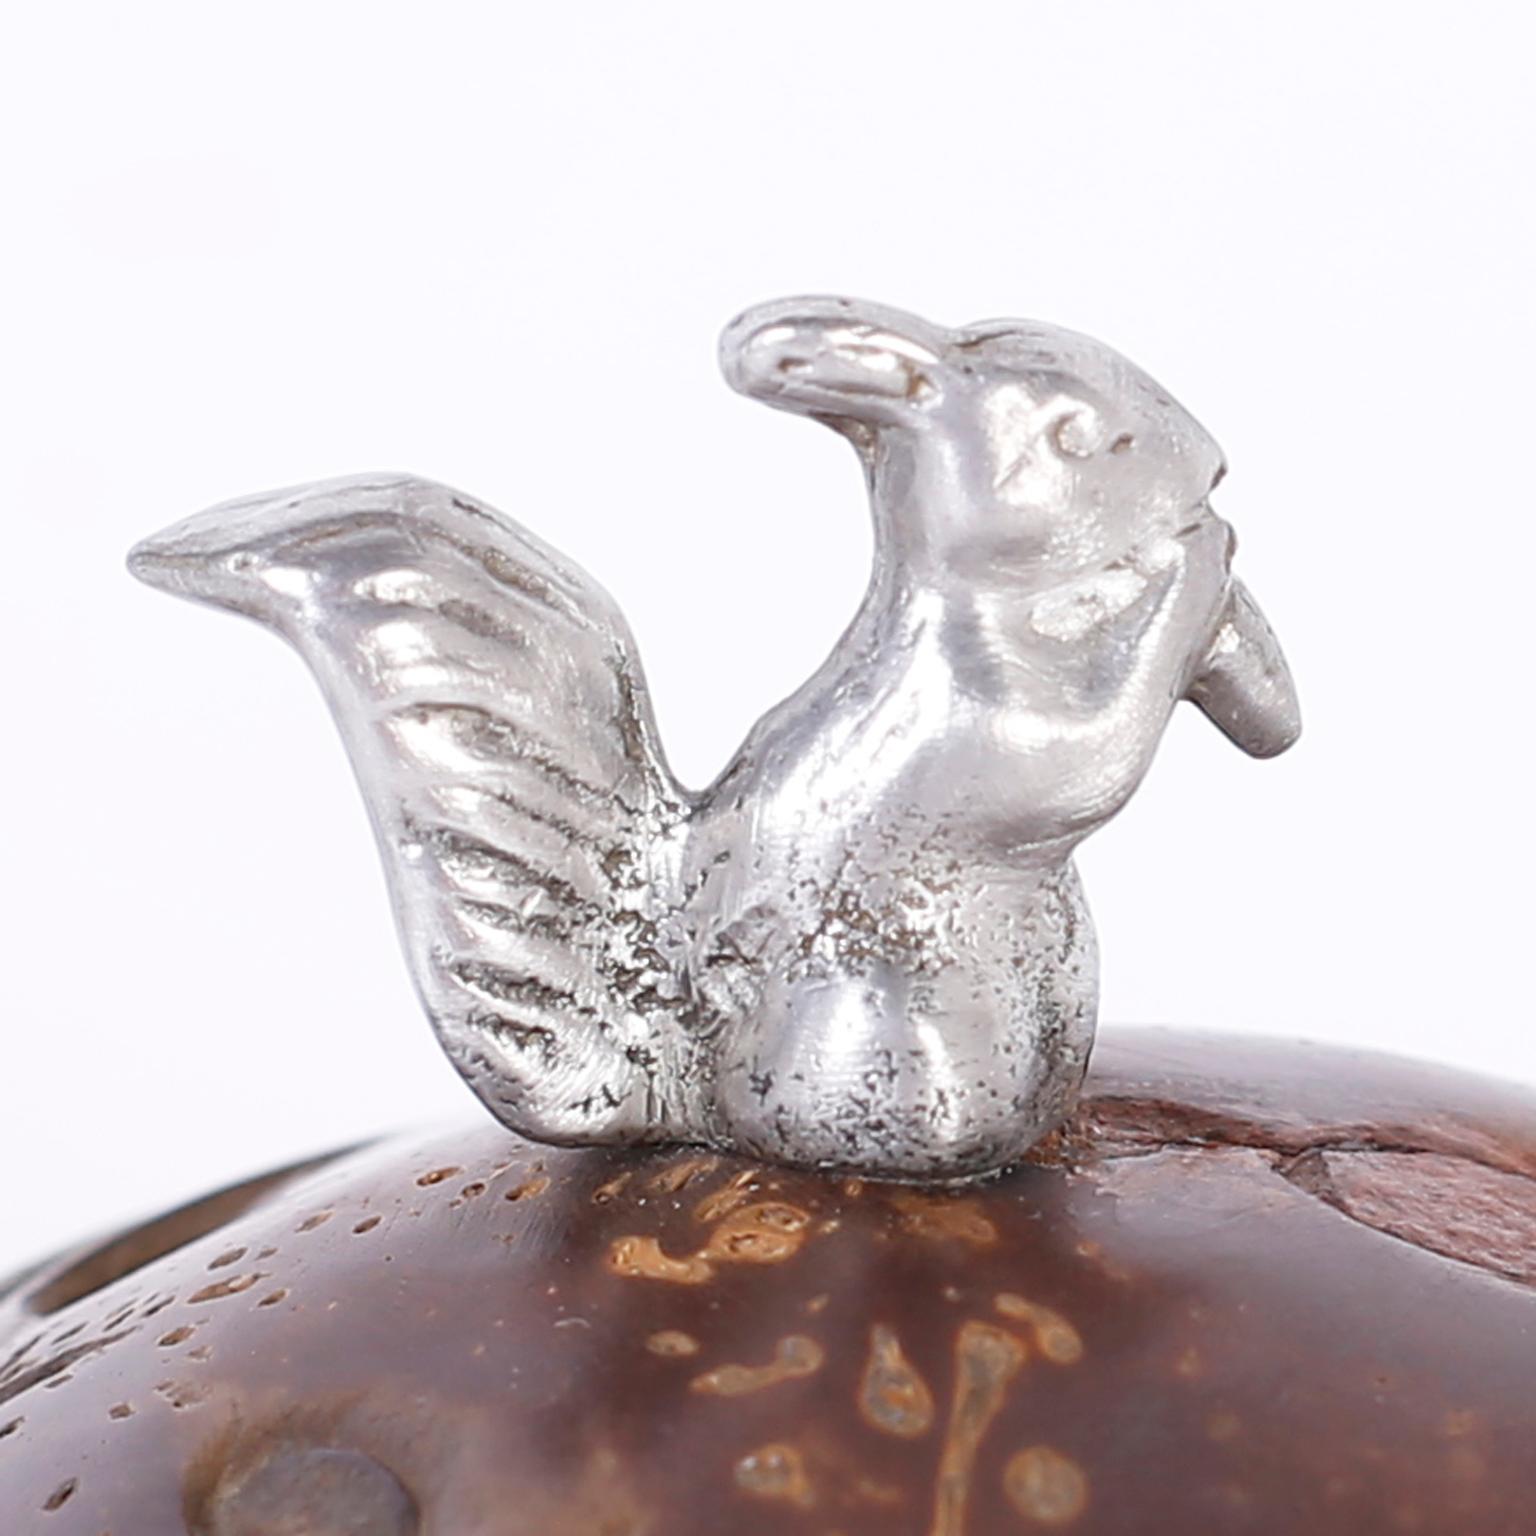 Anglo-Indian lidded container crafted with a polished coconut and silver metal with the unexpected squirrel handle.